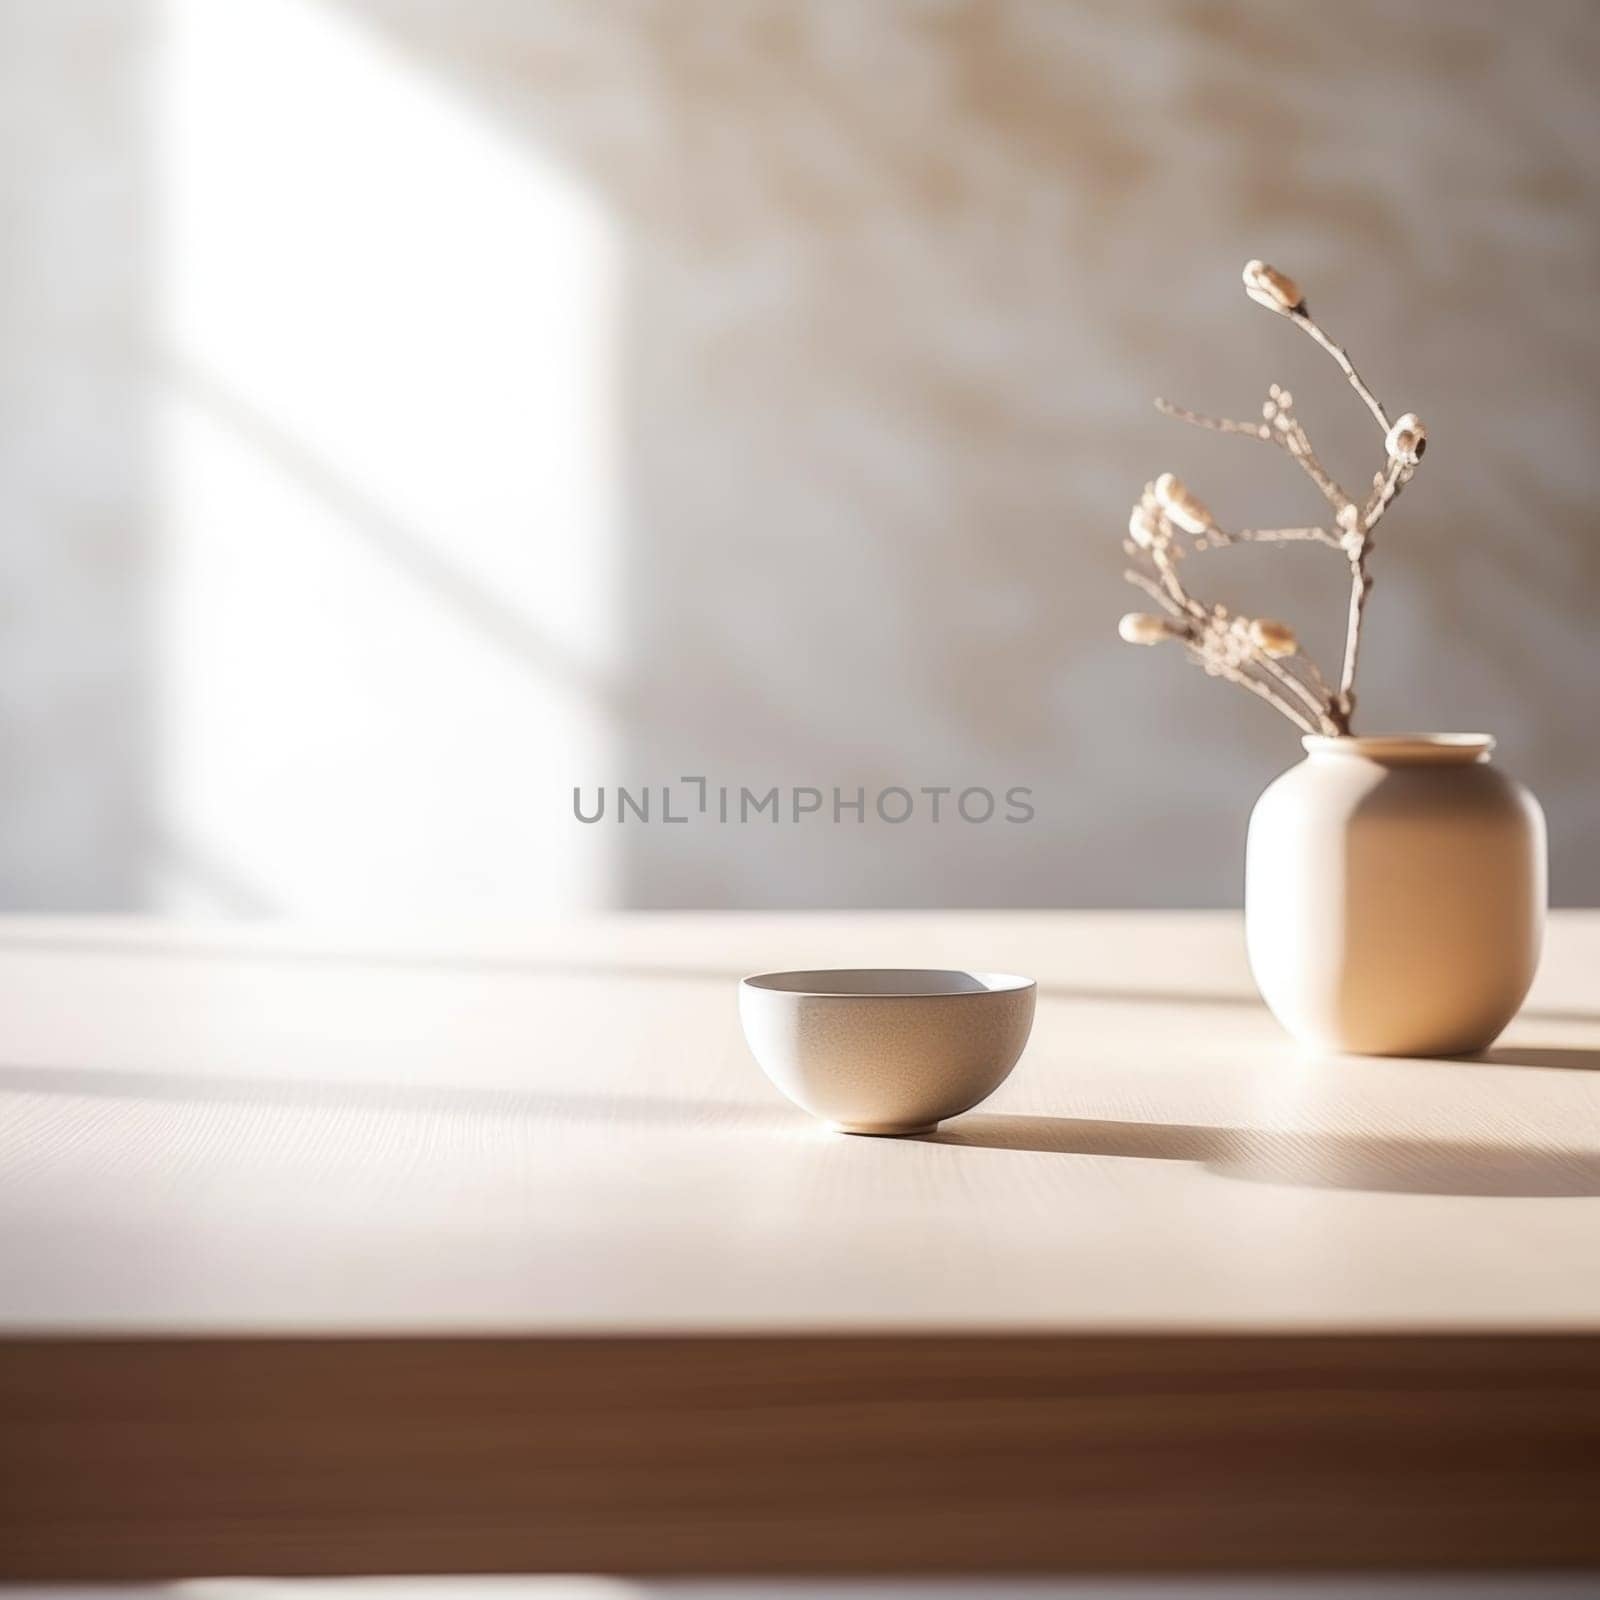 A white vase and bowl on a table